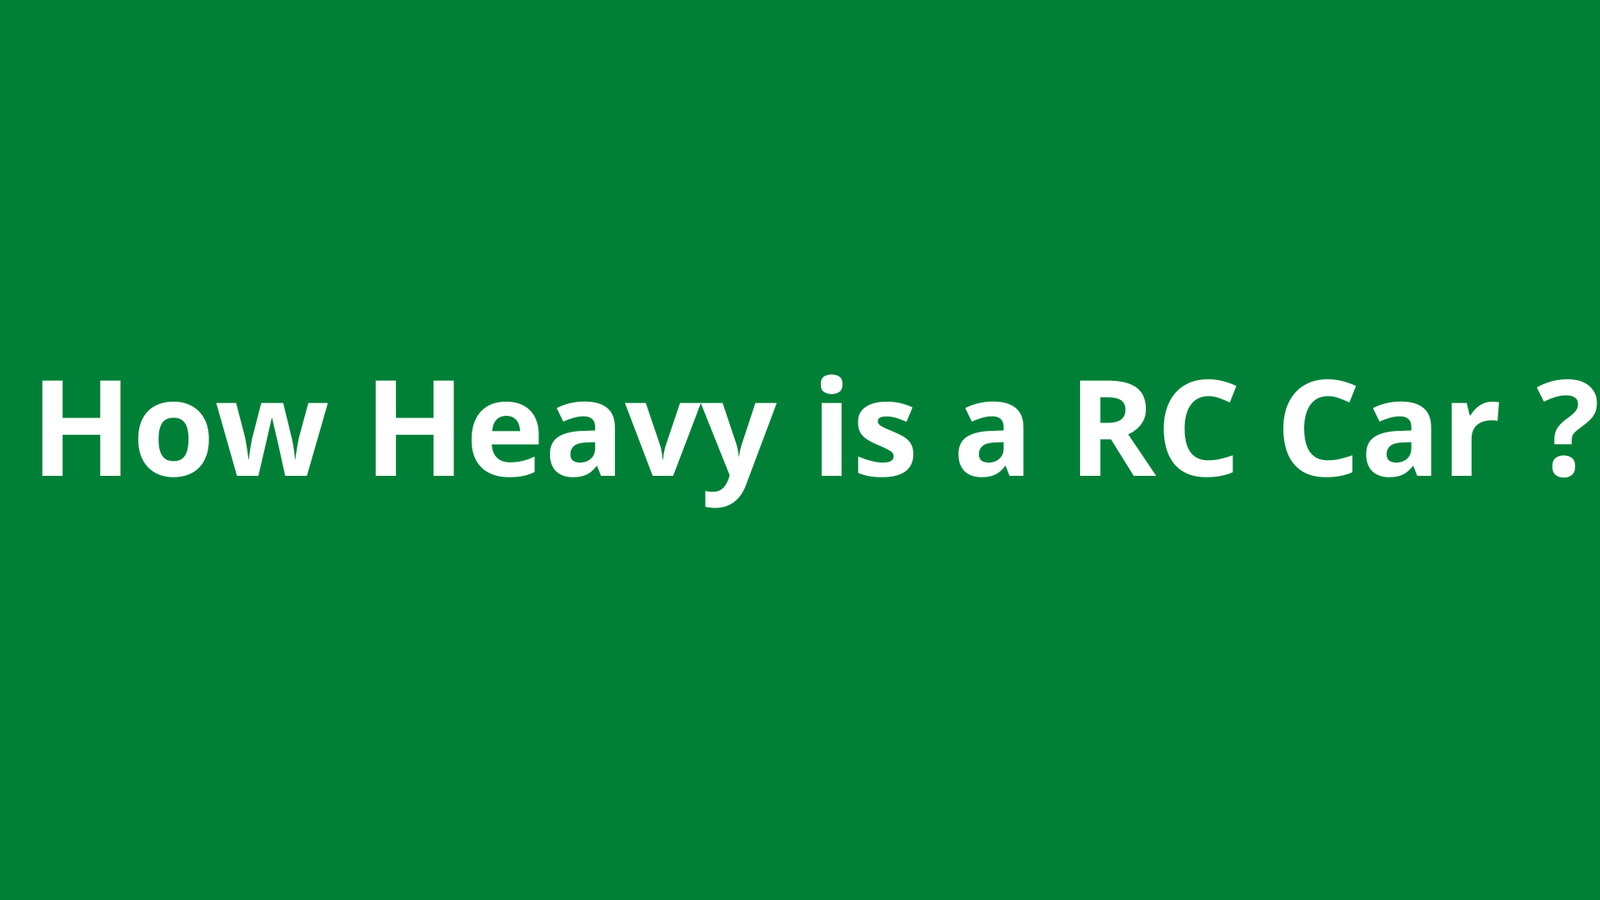 How Heavy is a RC Car